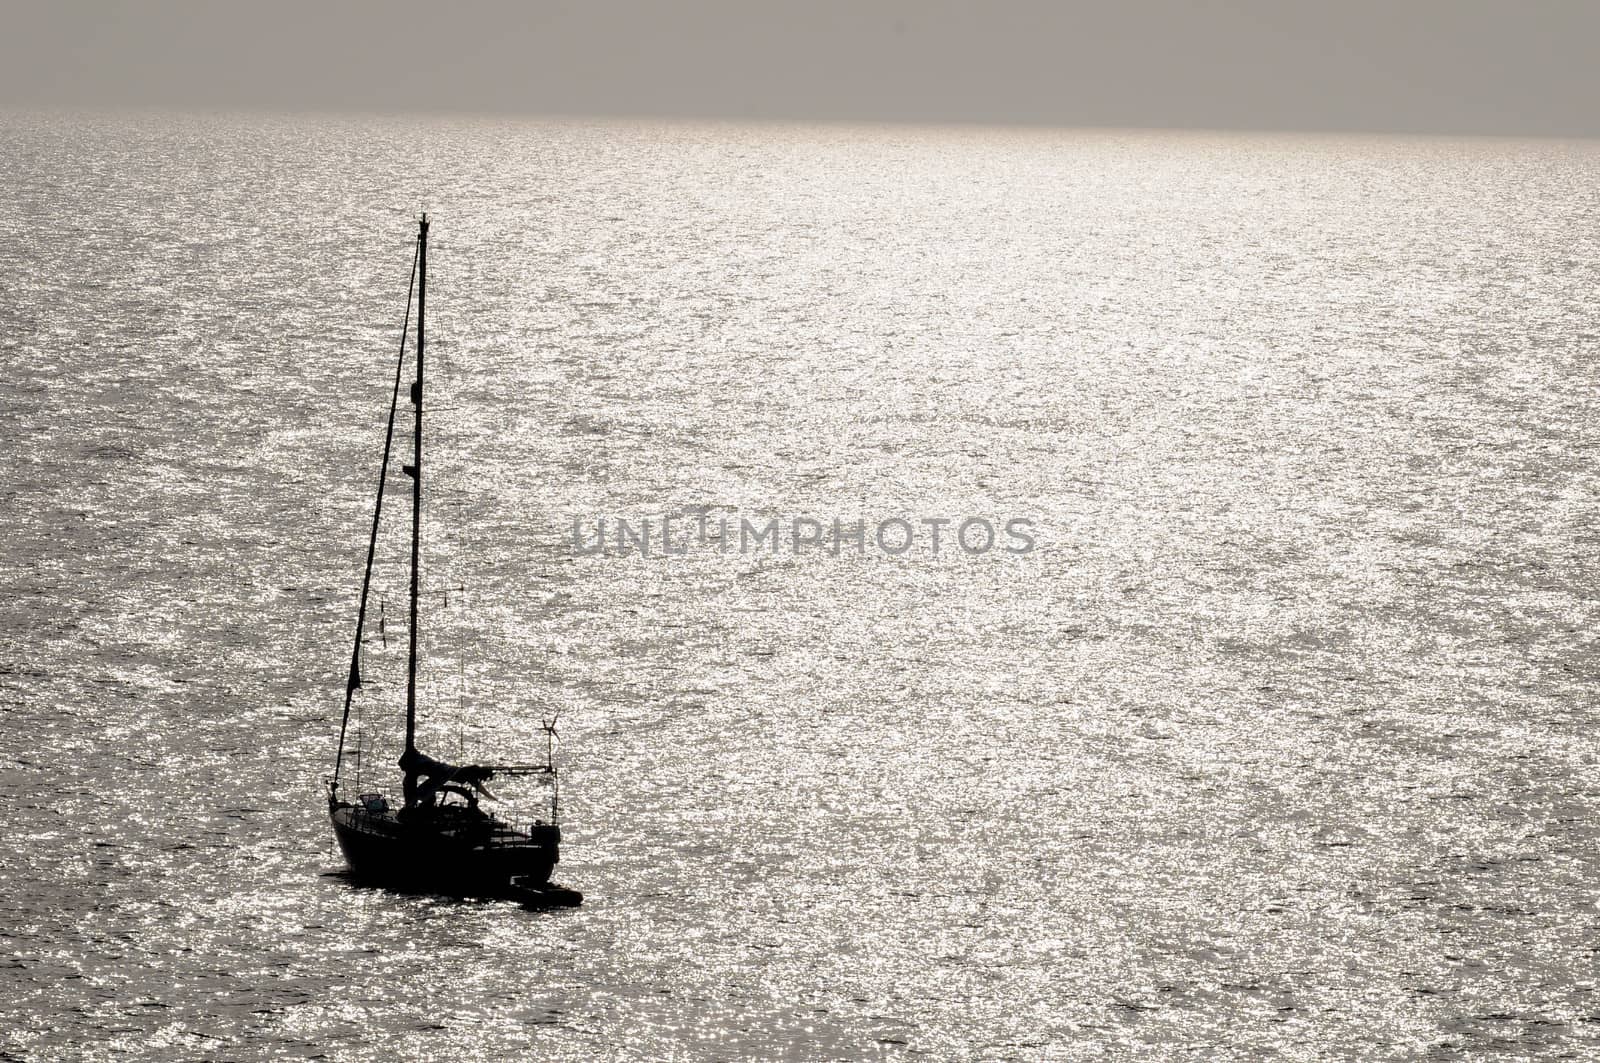 Silhouetted Sailing Boat on the Atlantic Ocean Near Canary Island